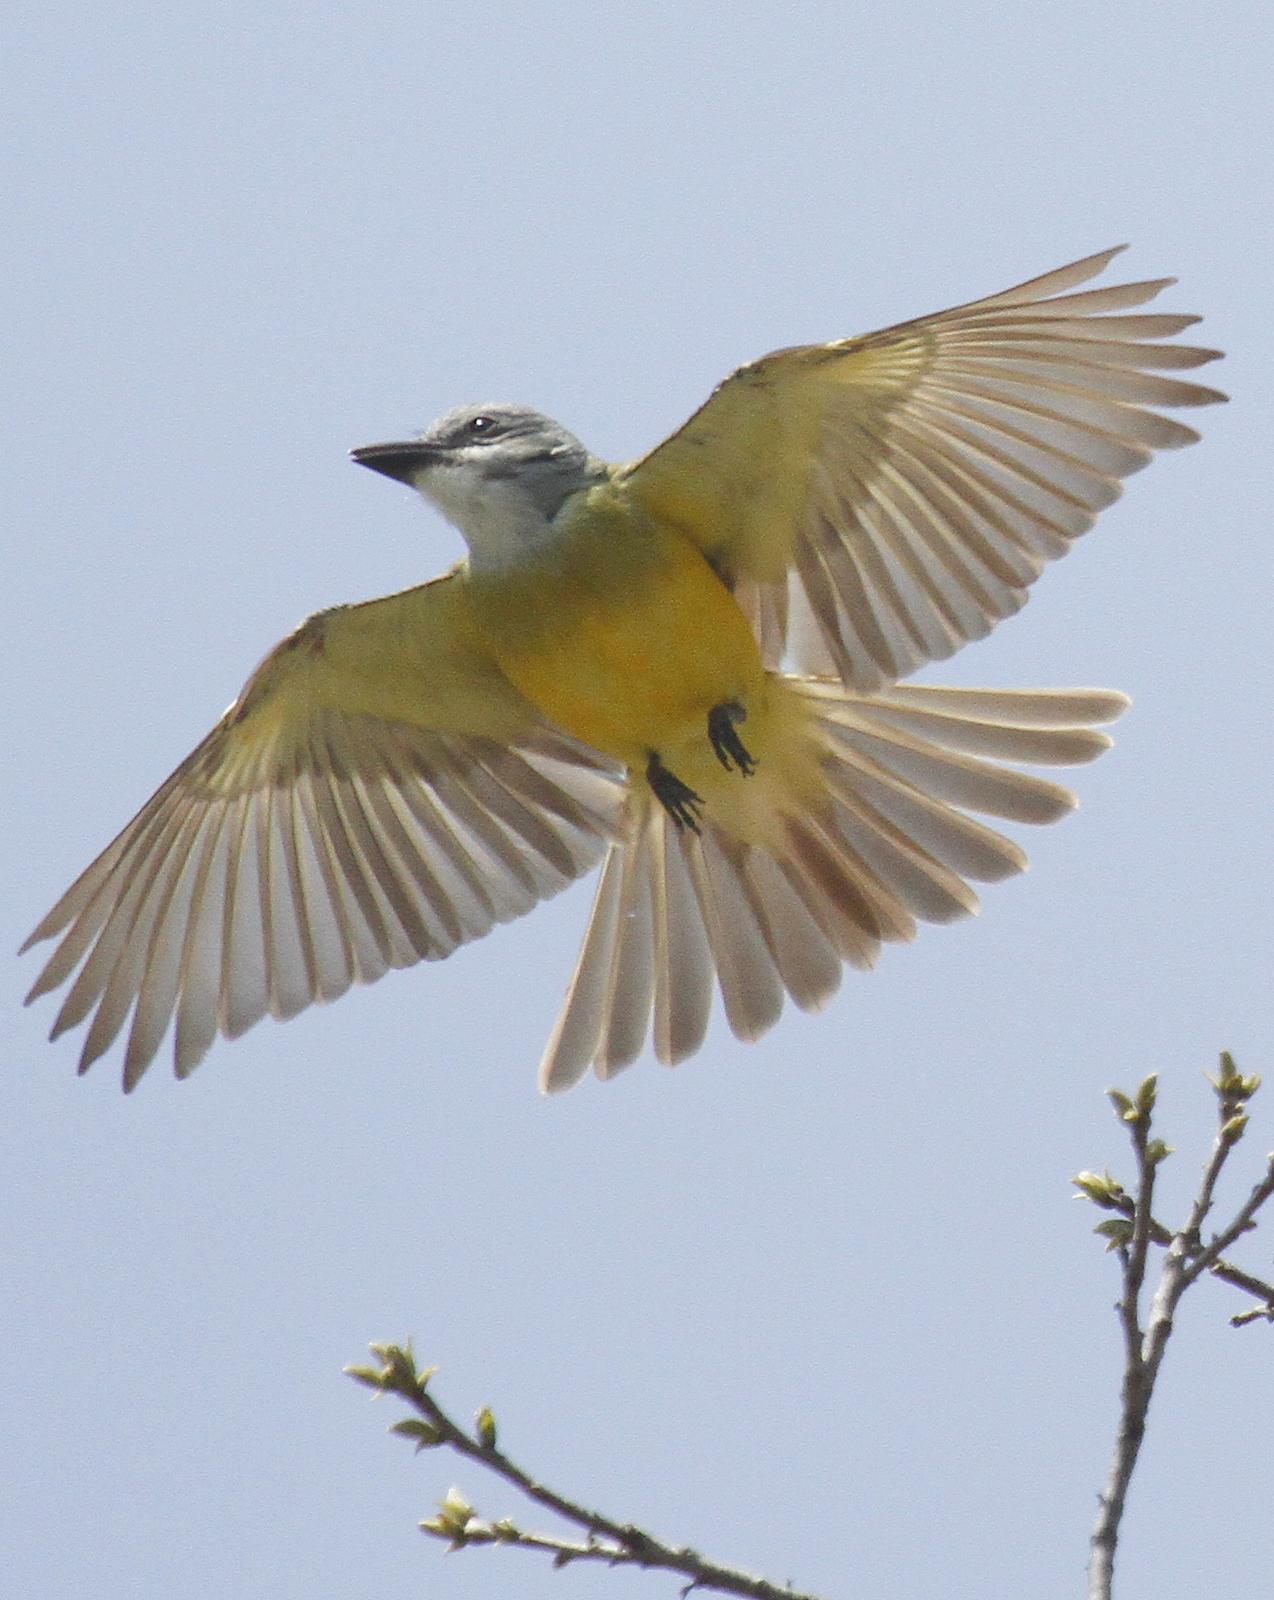 Couch's Kingbird Photo by Isaac Sanchez